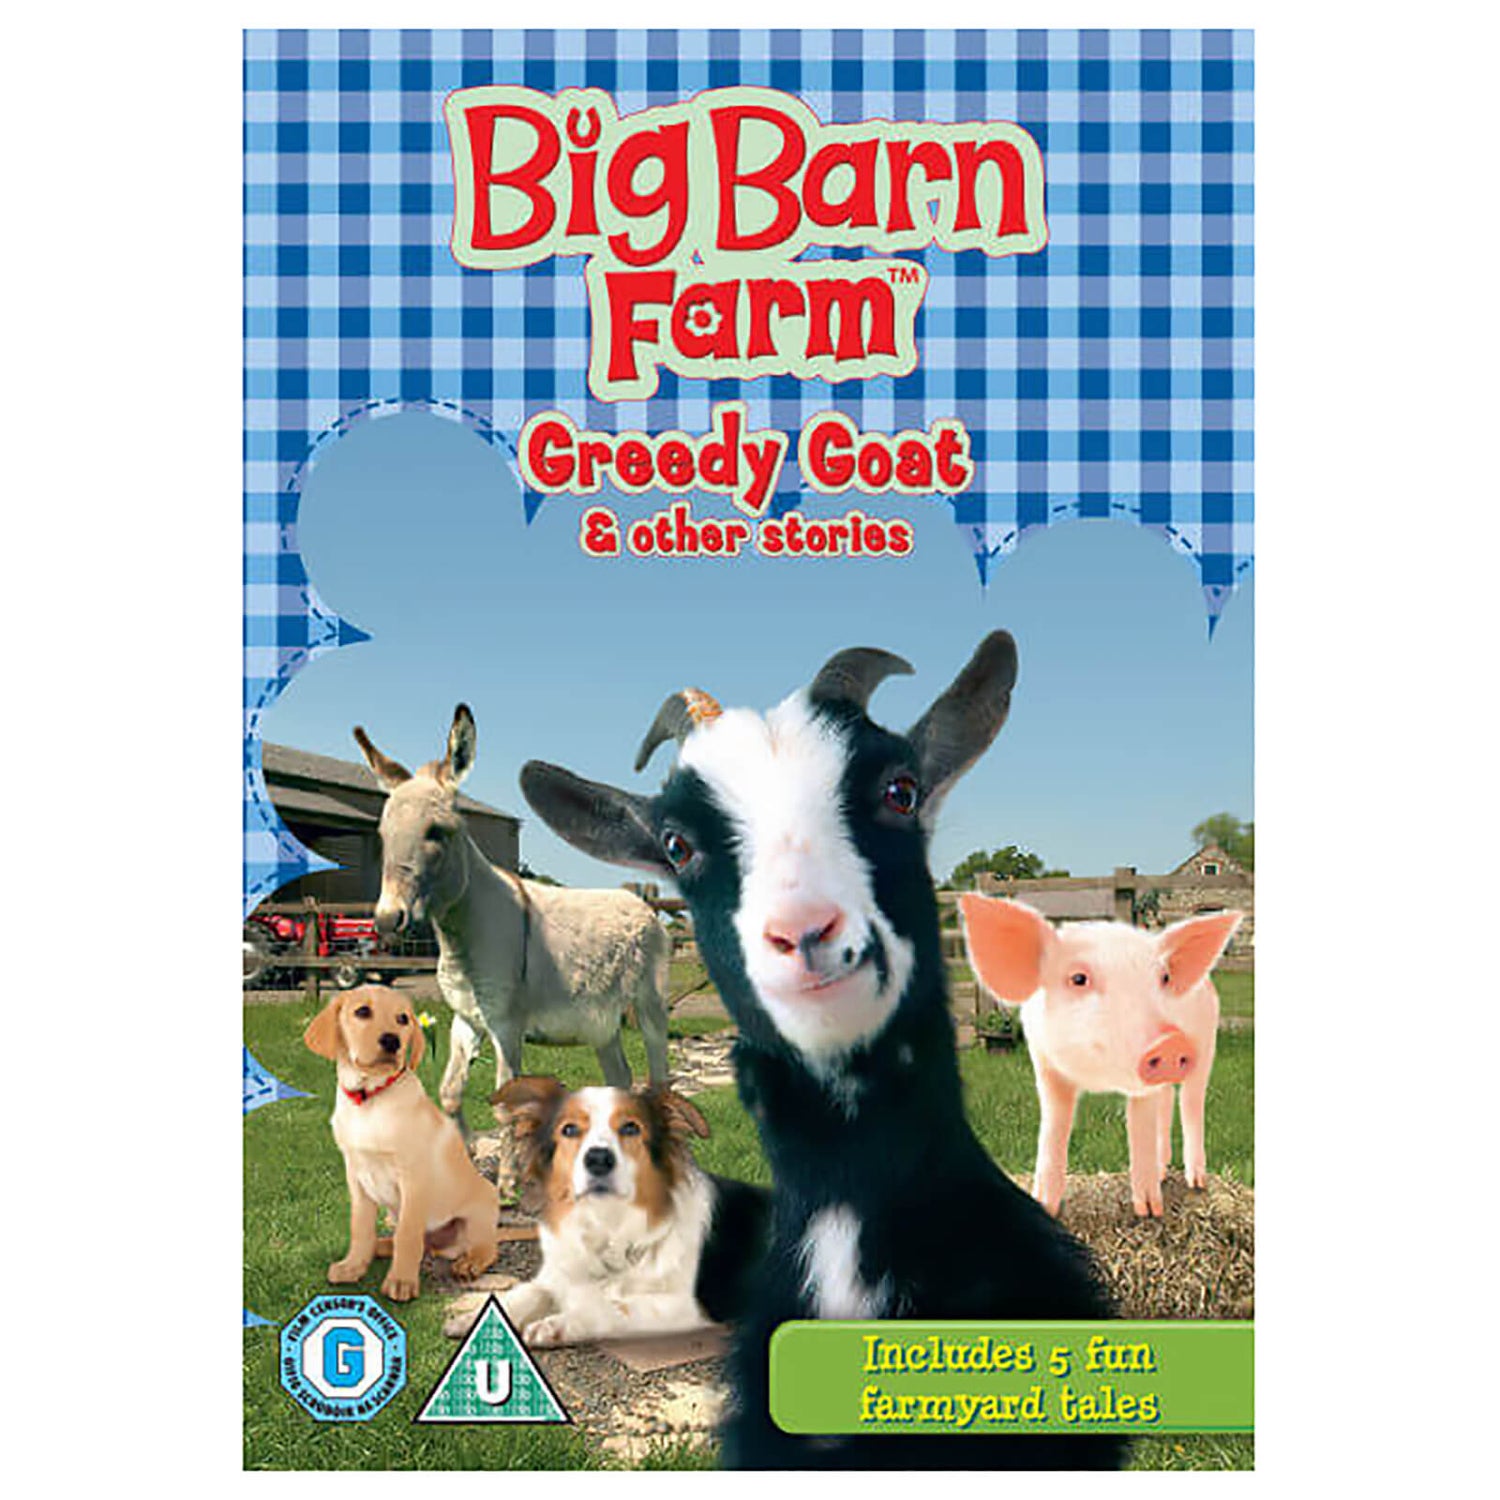 Big Barn Farm: Greedy Goat and other stories